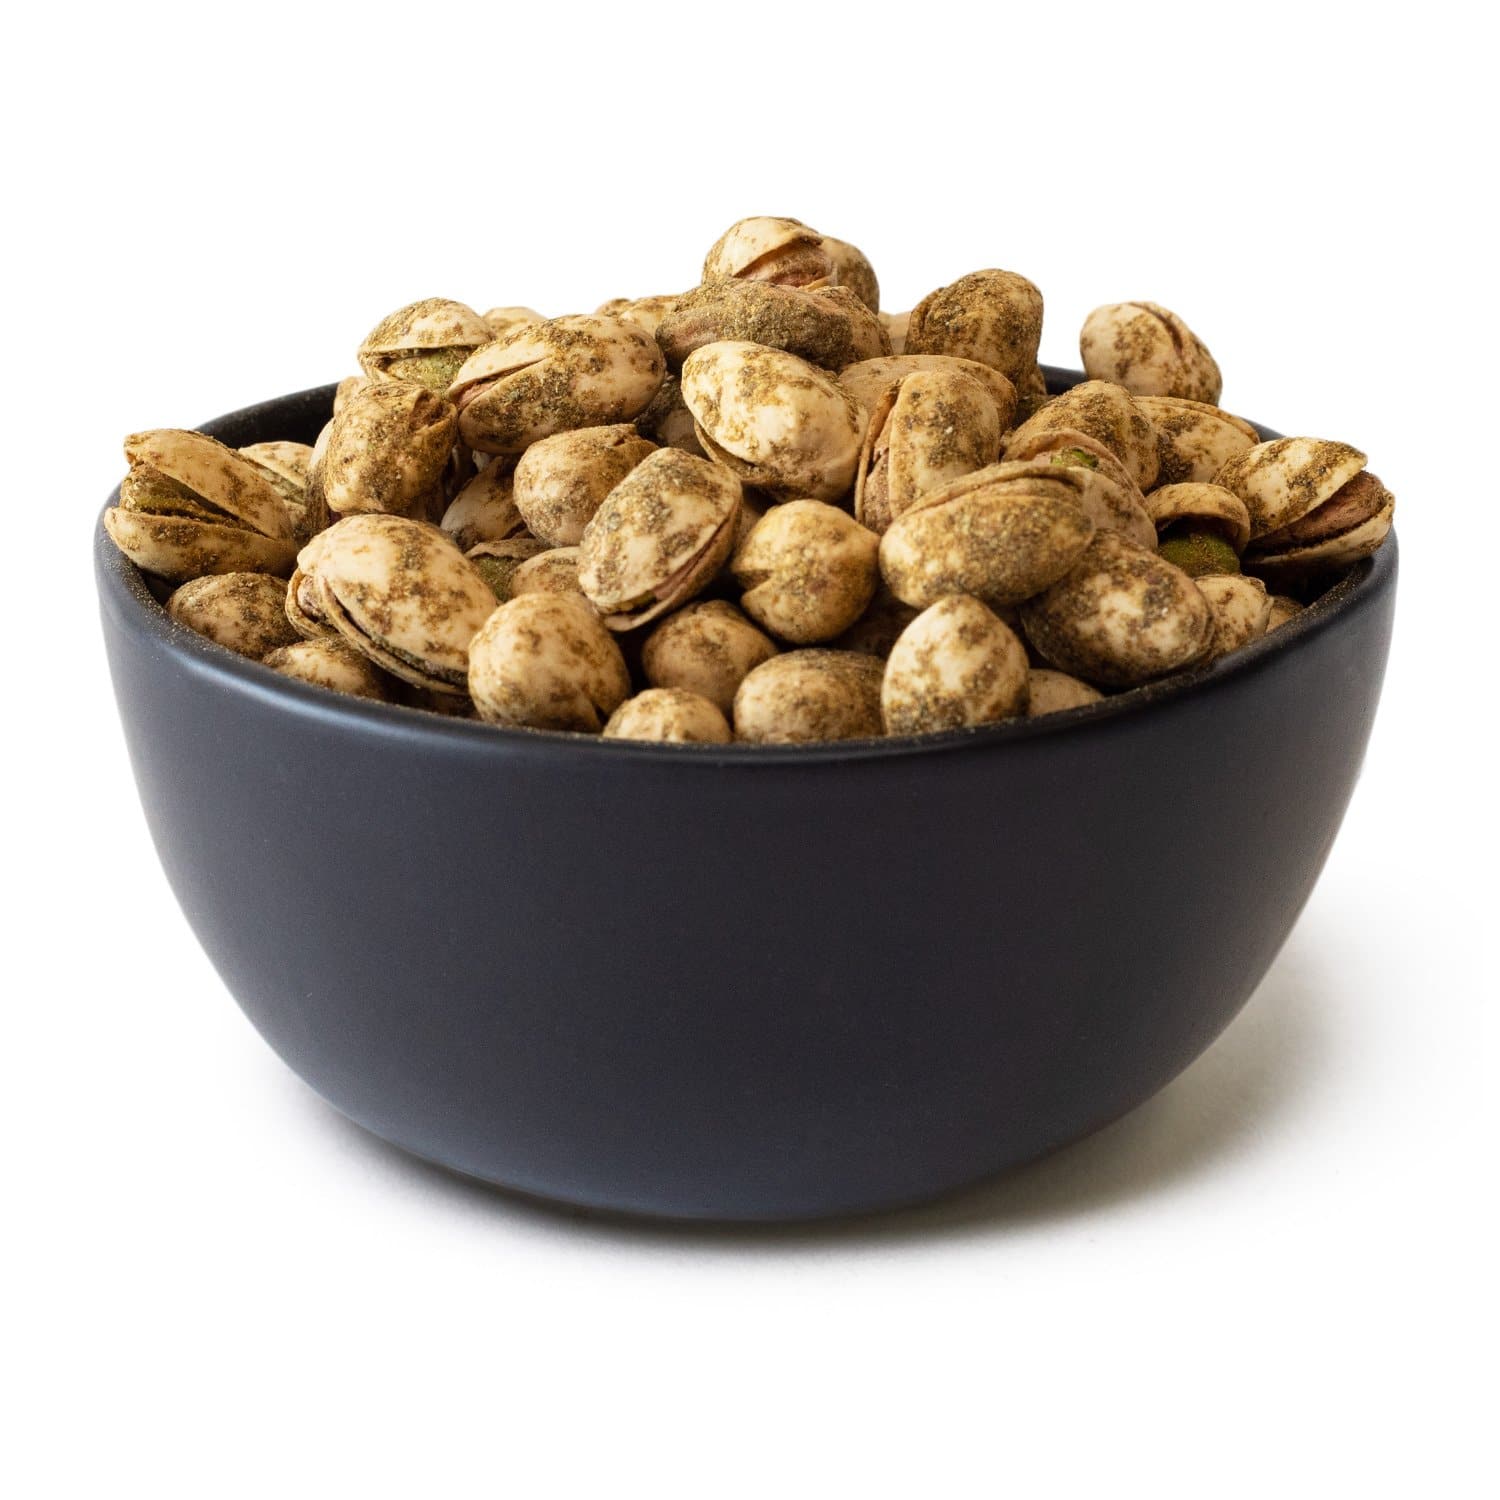 A bowl filled with Green Chile Pistachios on a white background. The bowl is dark blue and contrasts with the light green, textured surface of the pistachios.